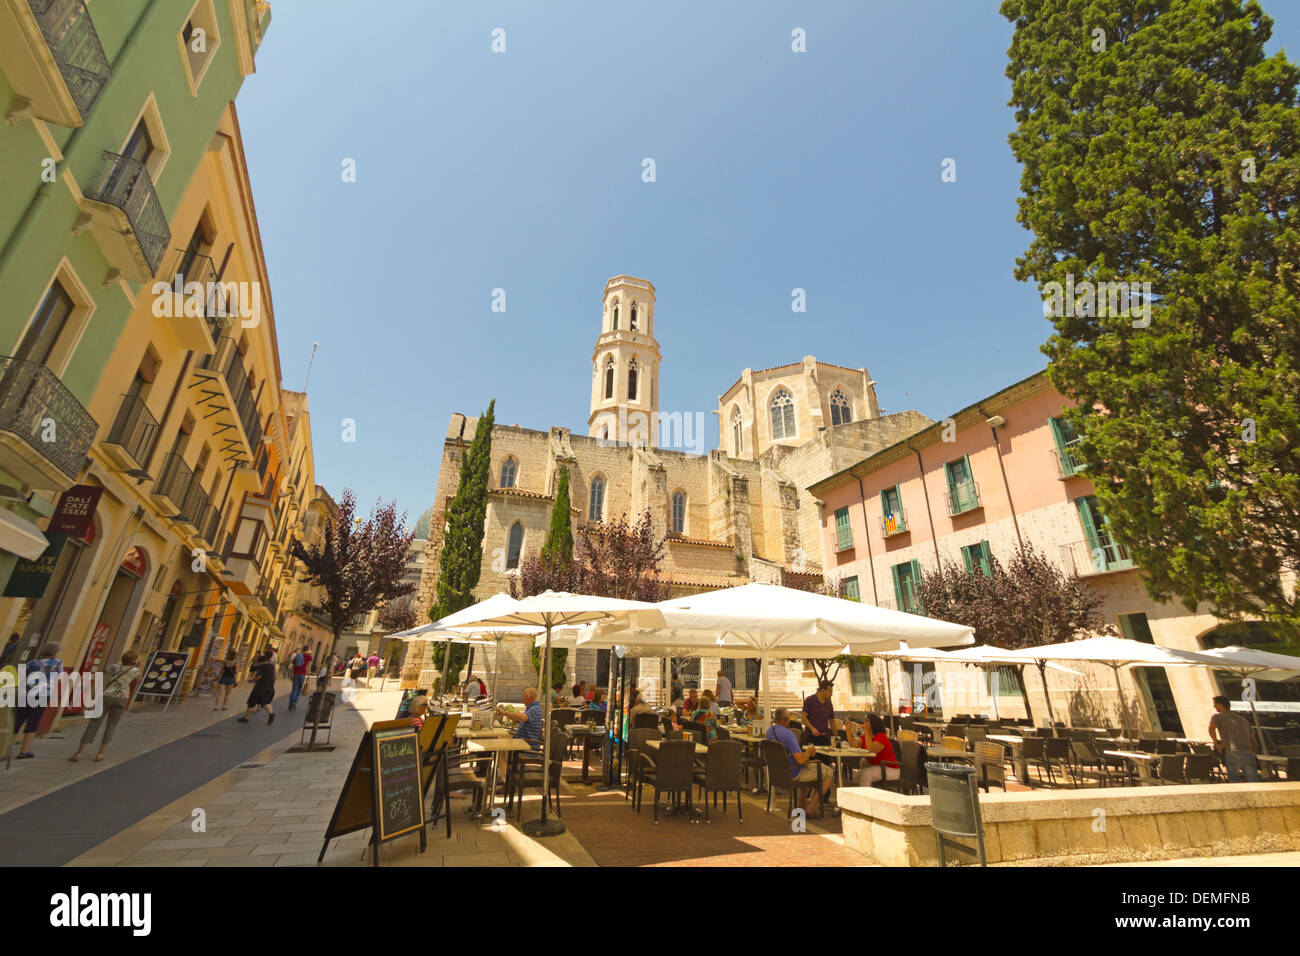 Main square in Figueres, Spain on June 14, 2012. Tourists in the church square in Figueres. In the background, the Dali Museum. Stock Photo